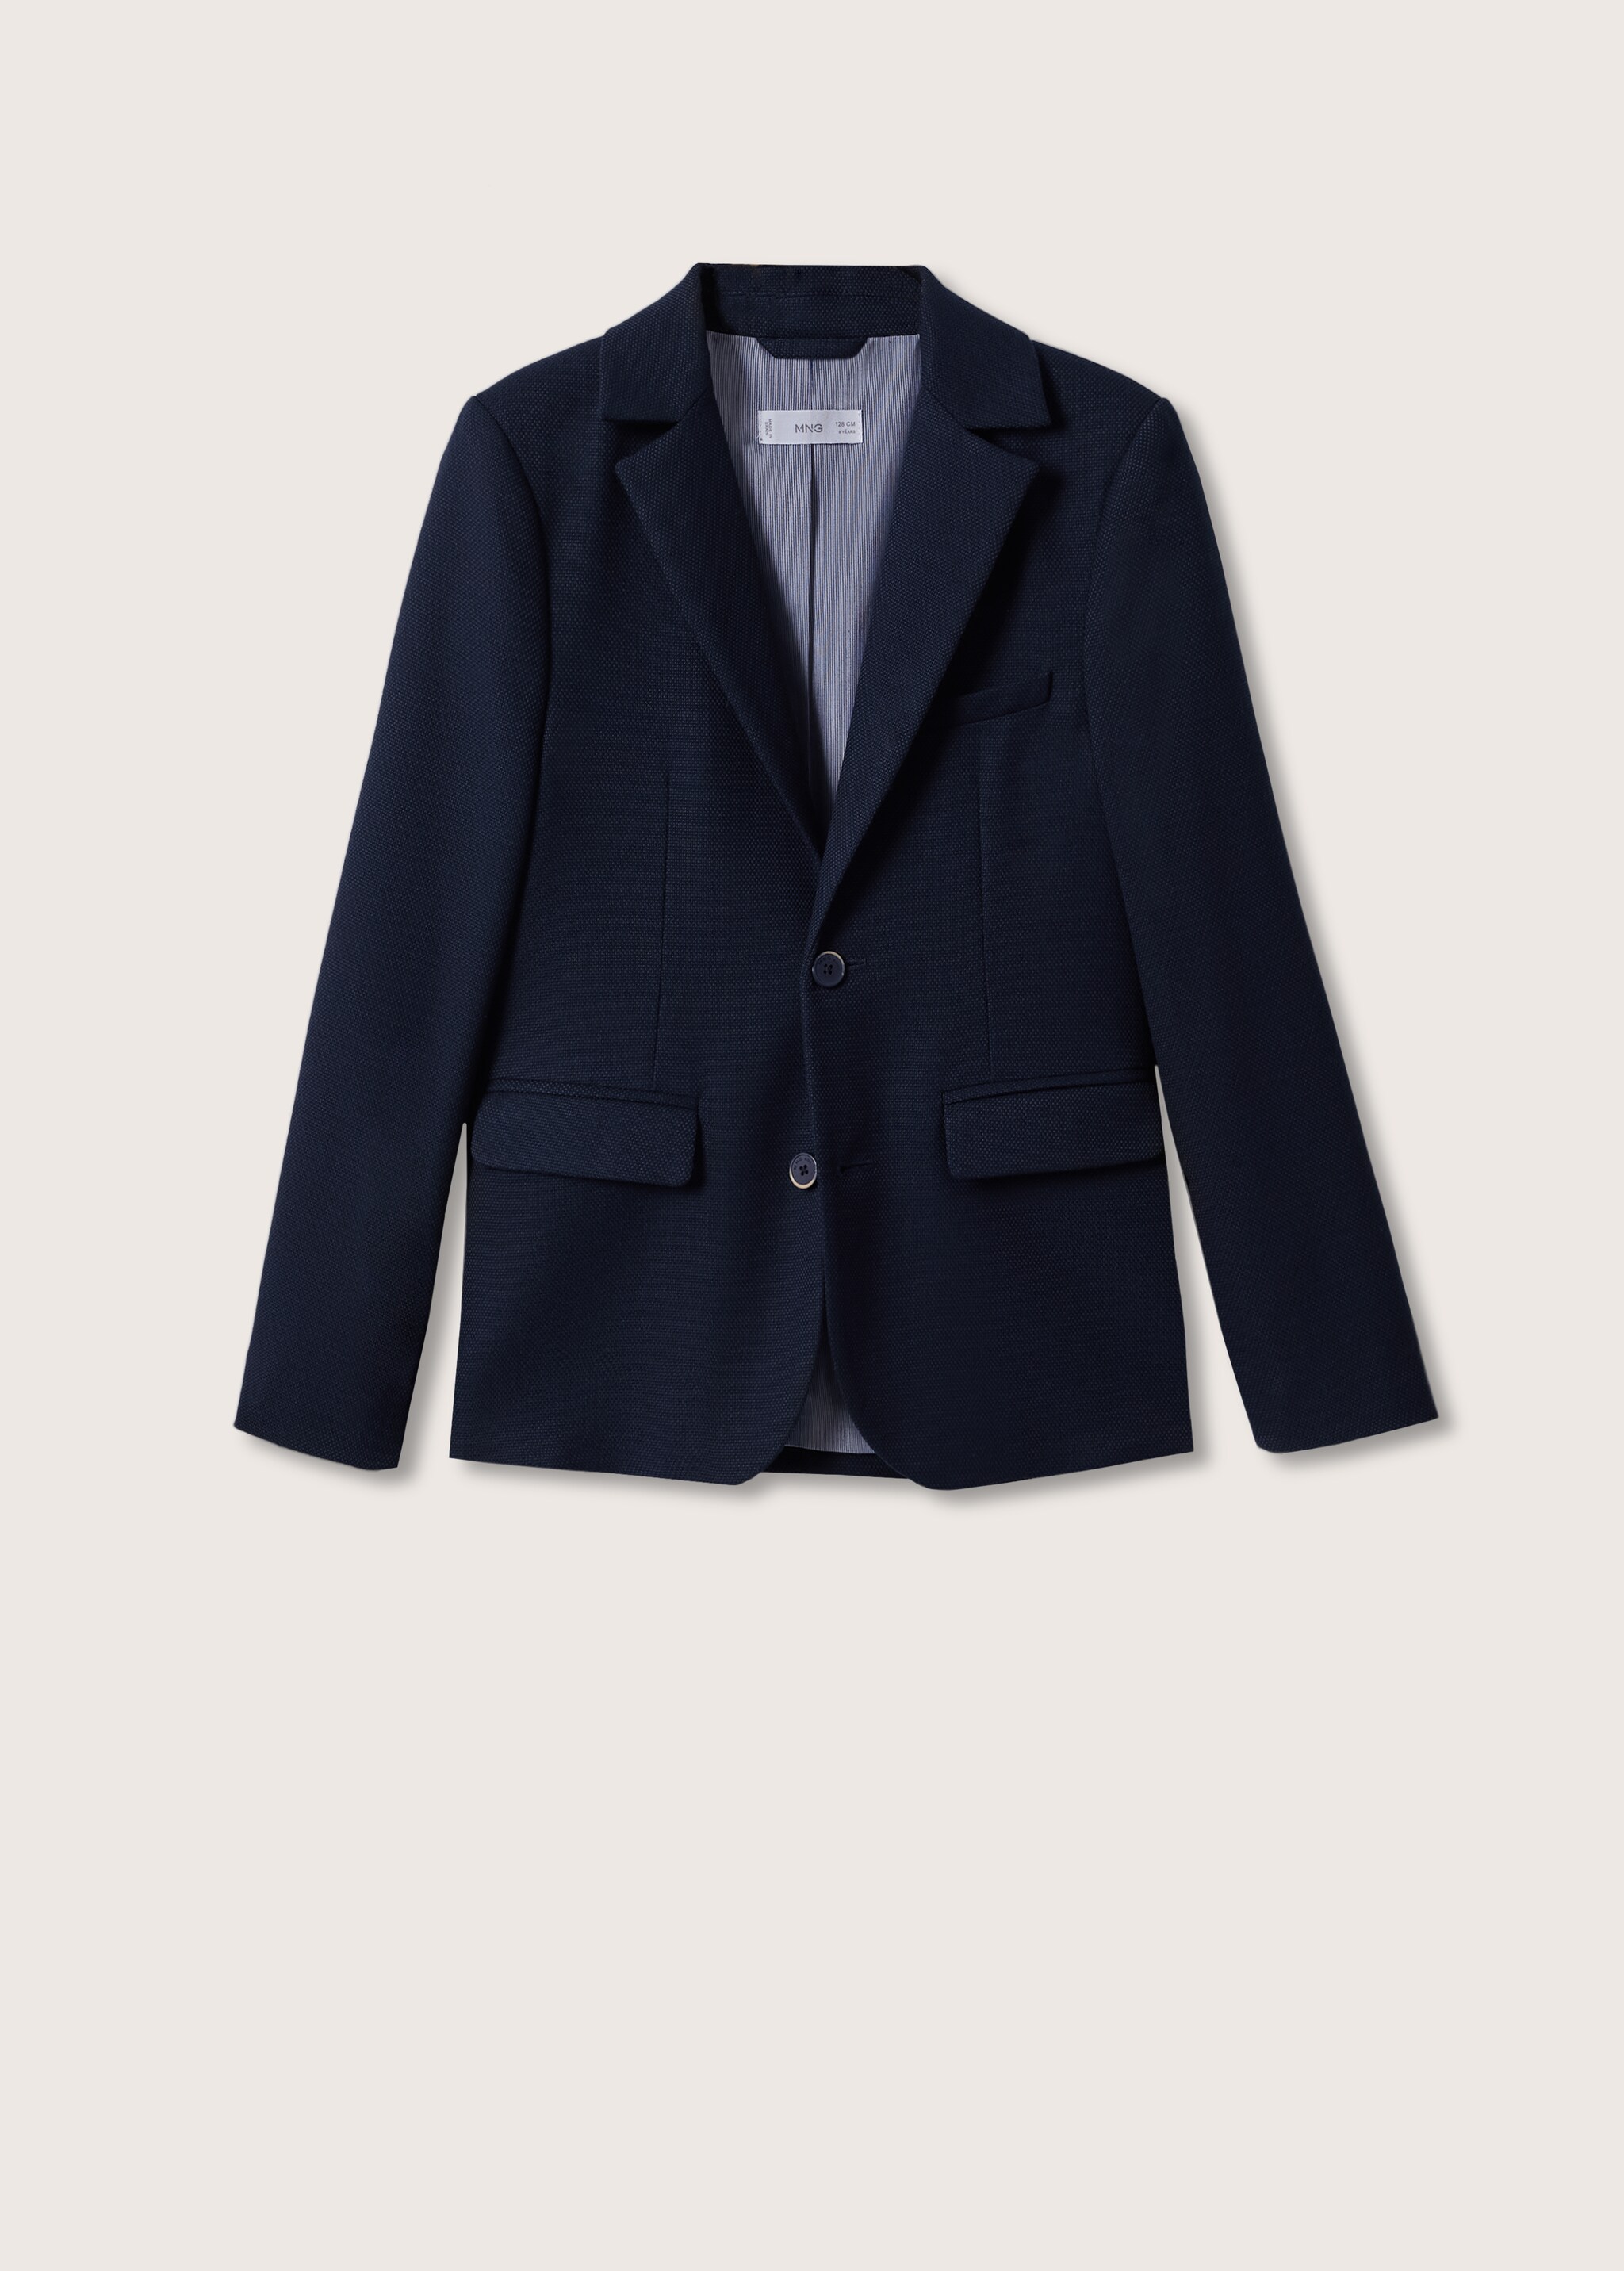 Textured slim fit blazer - Article without model